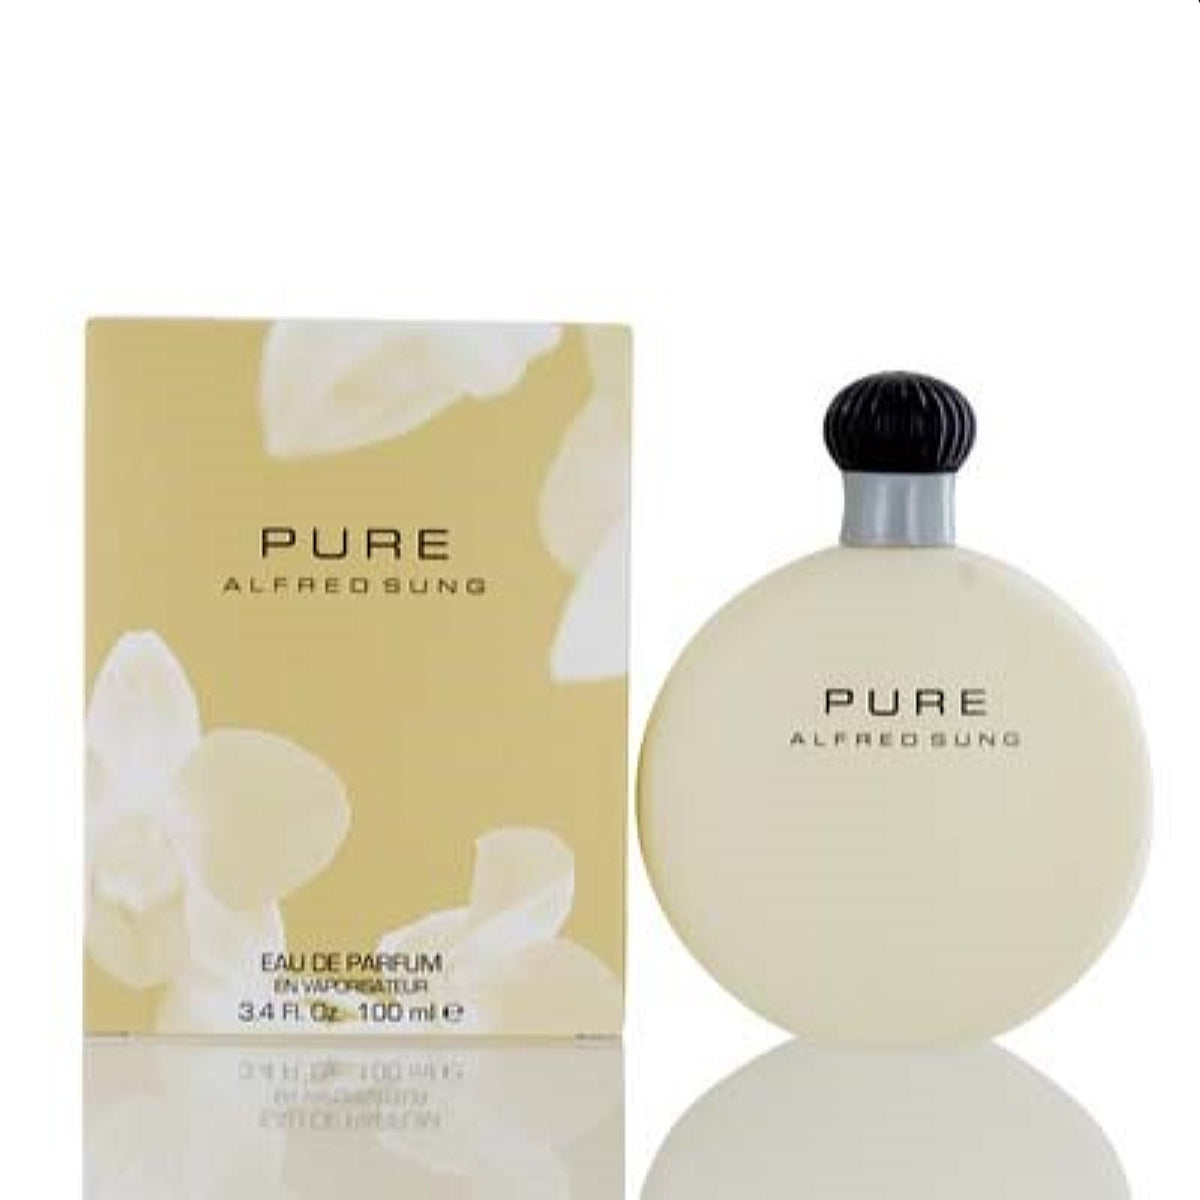 Pure Alfred Sung Edp Spray 3.4 Oz For Women 22010